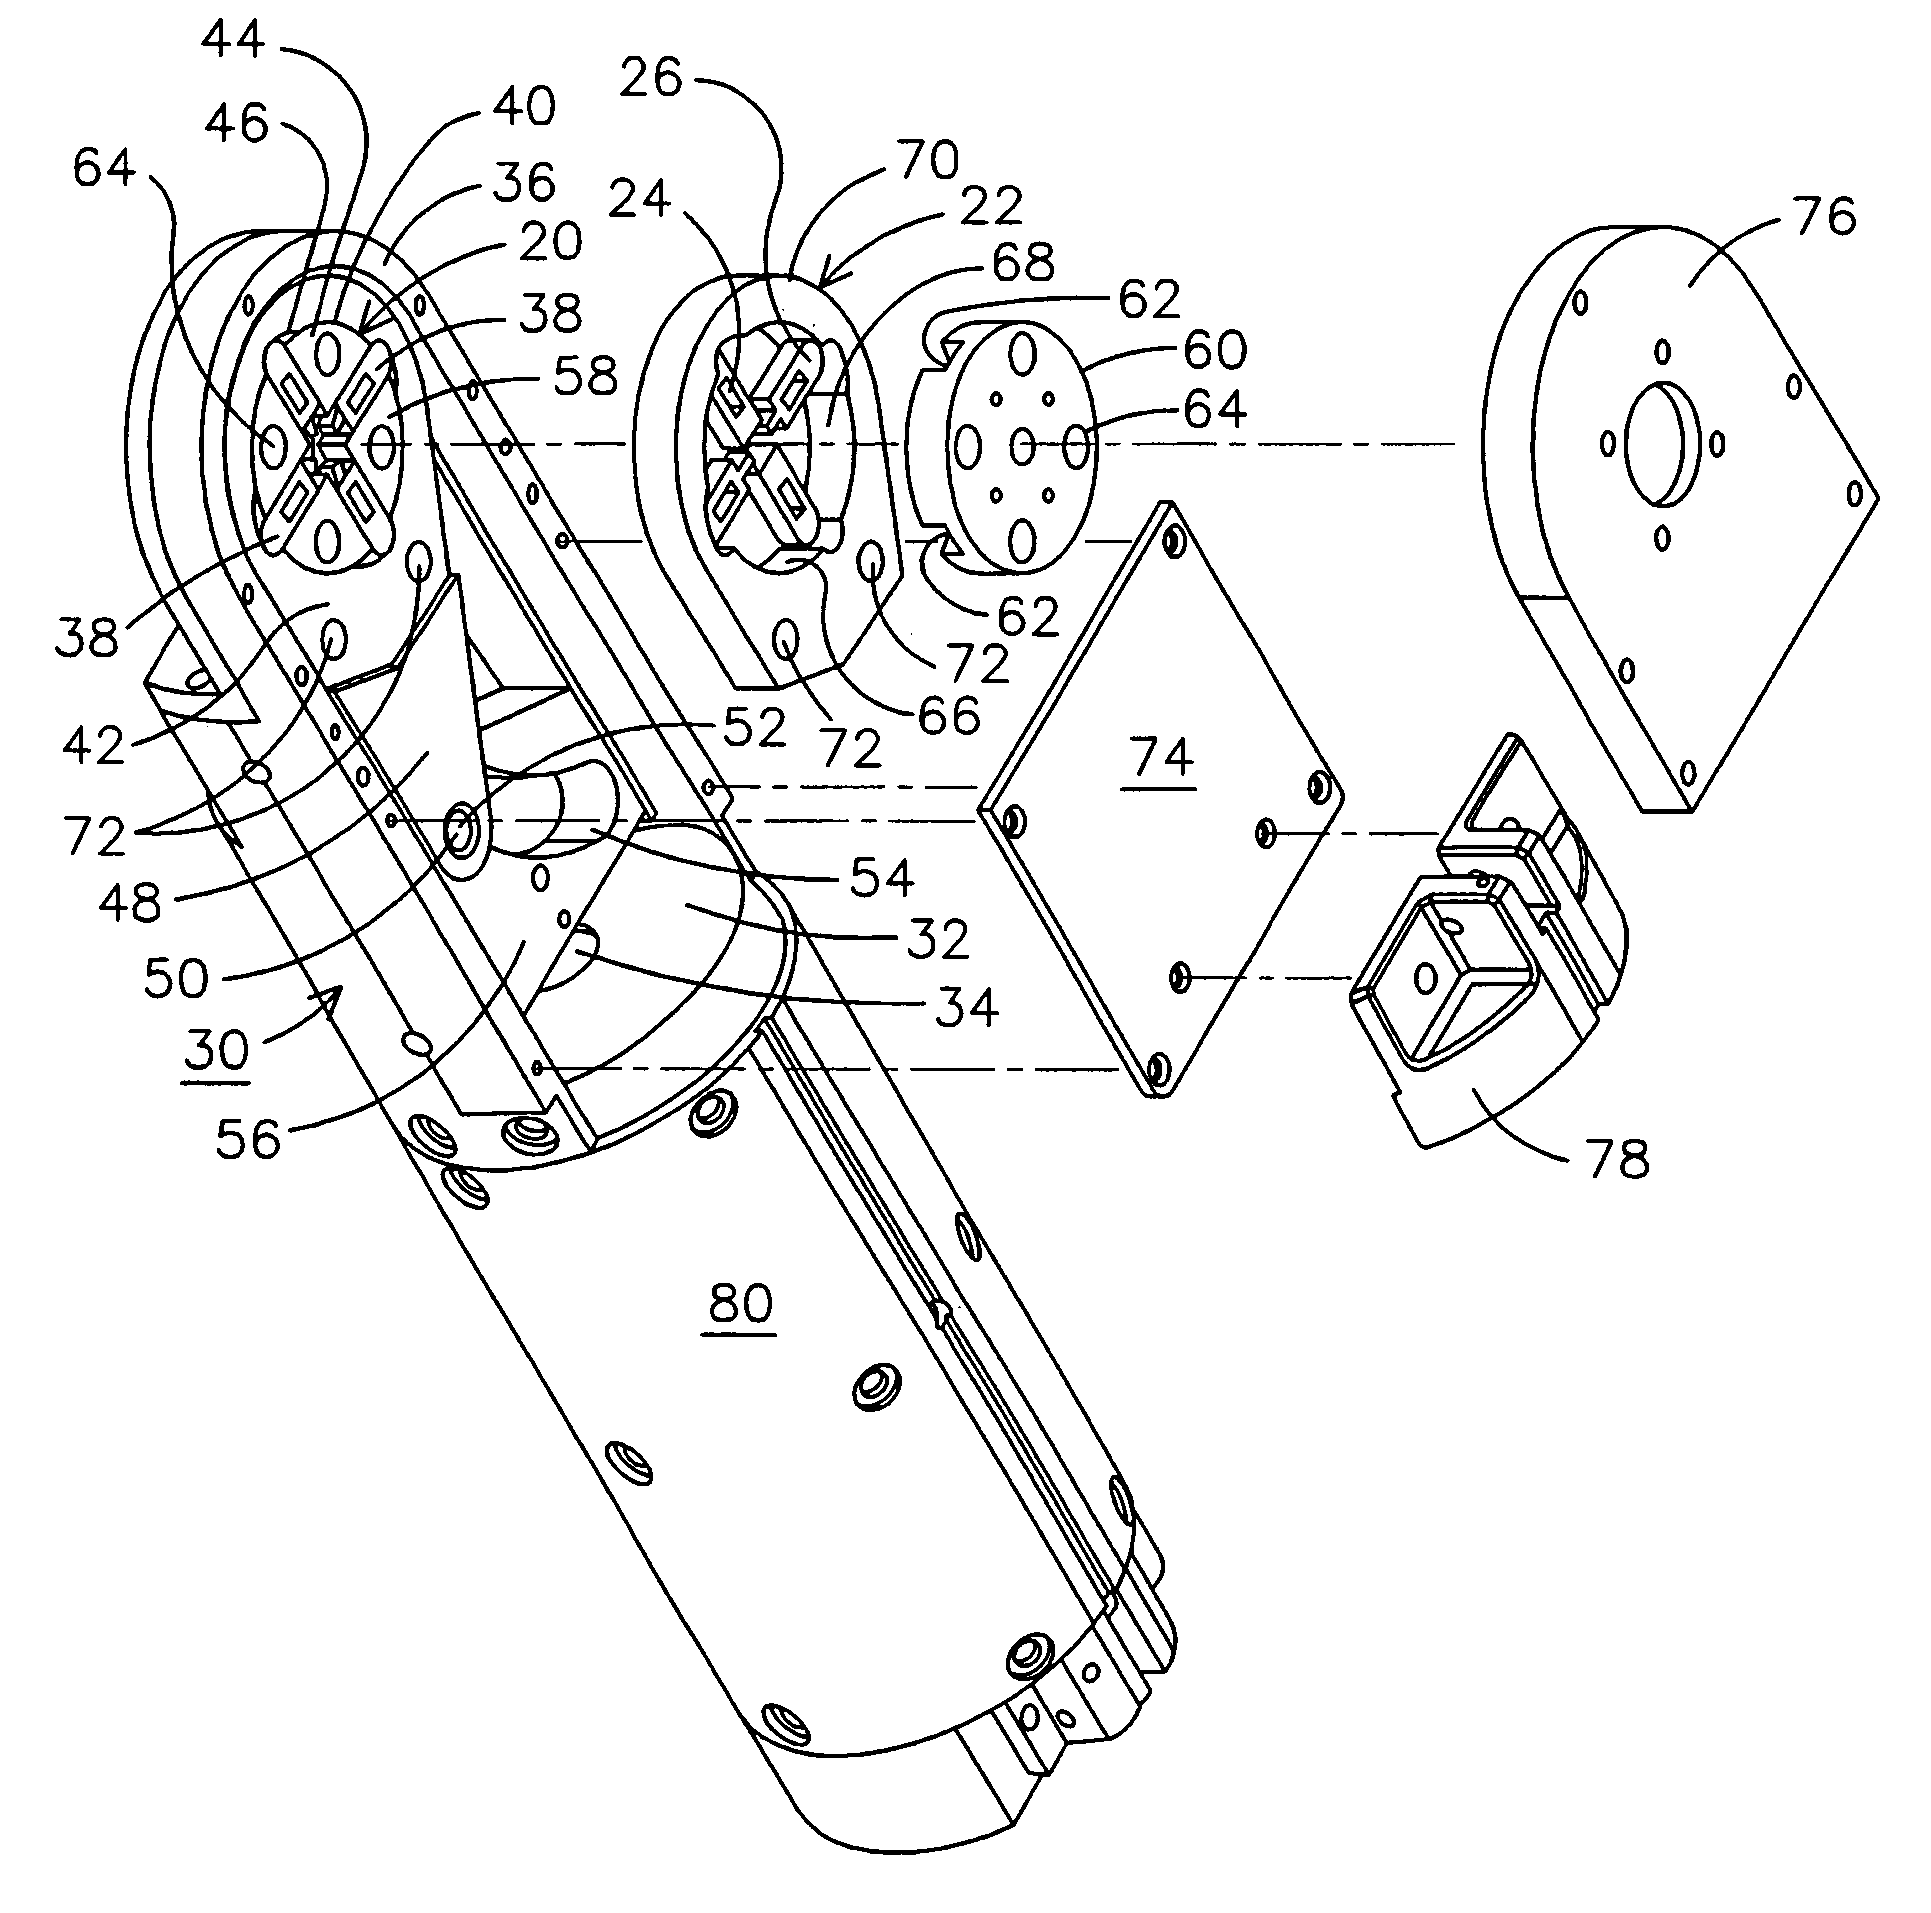 Crimp tool for crimping pin and socket contacts